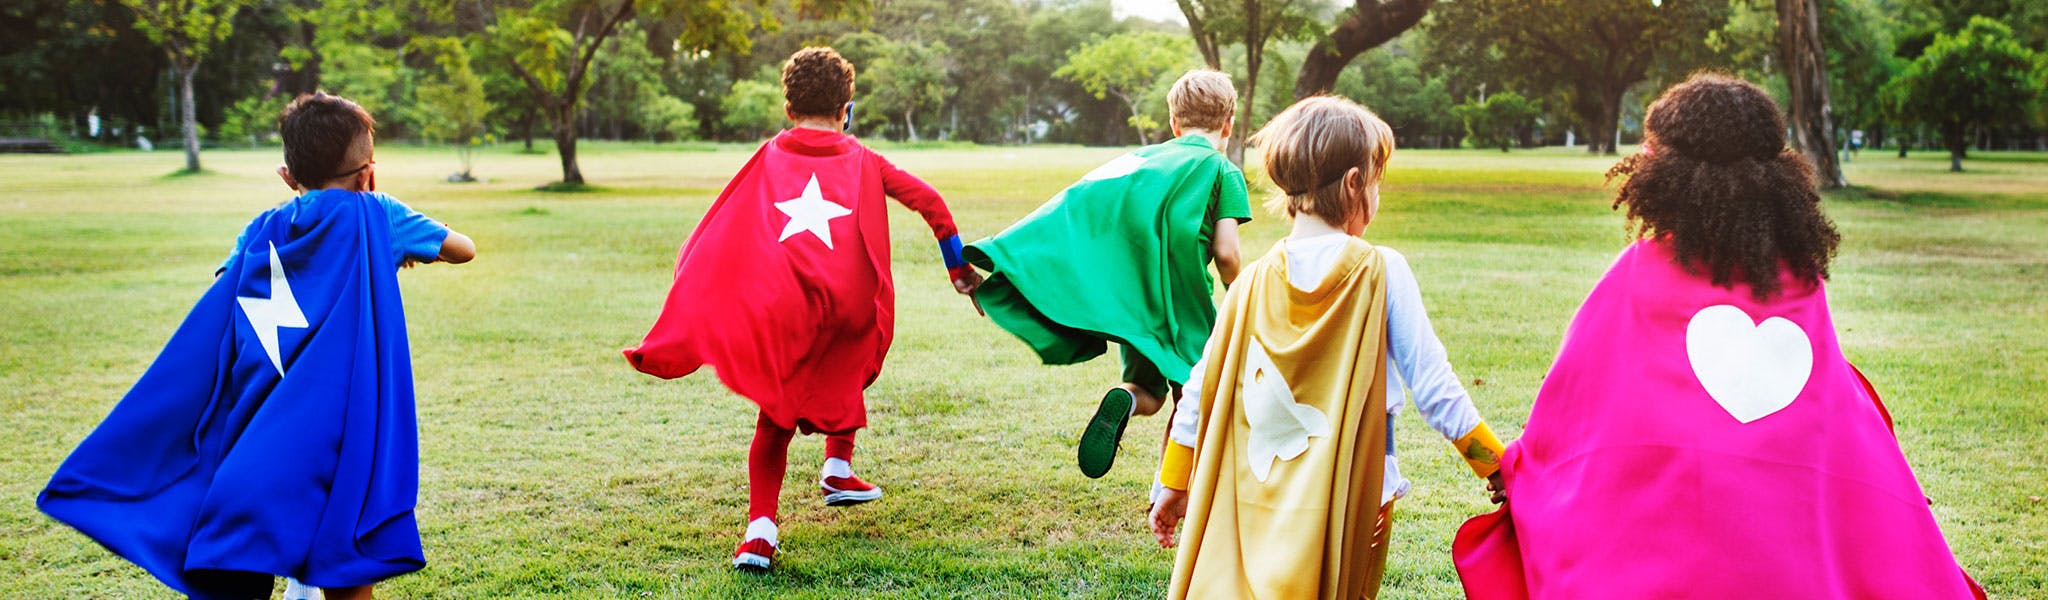 children in colourful capes pretending to superheroes in a park